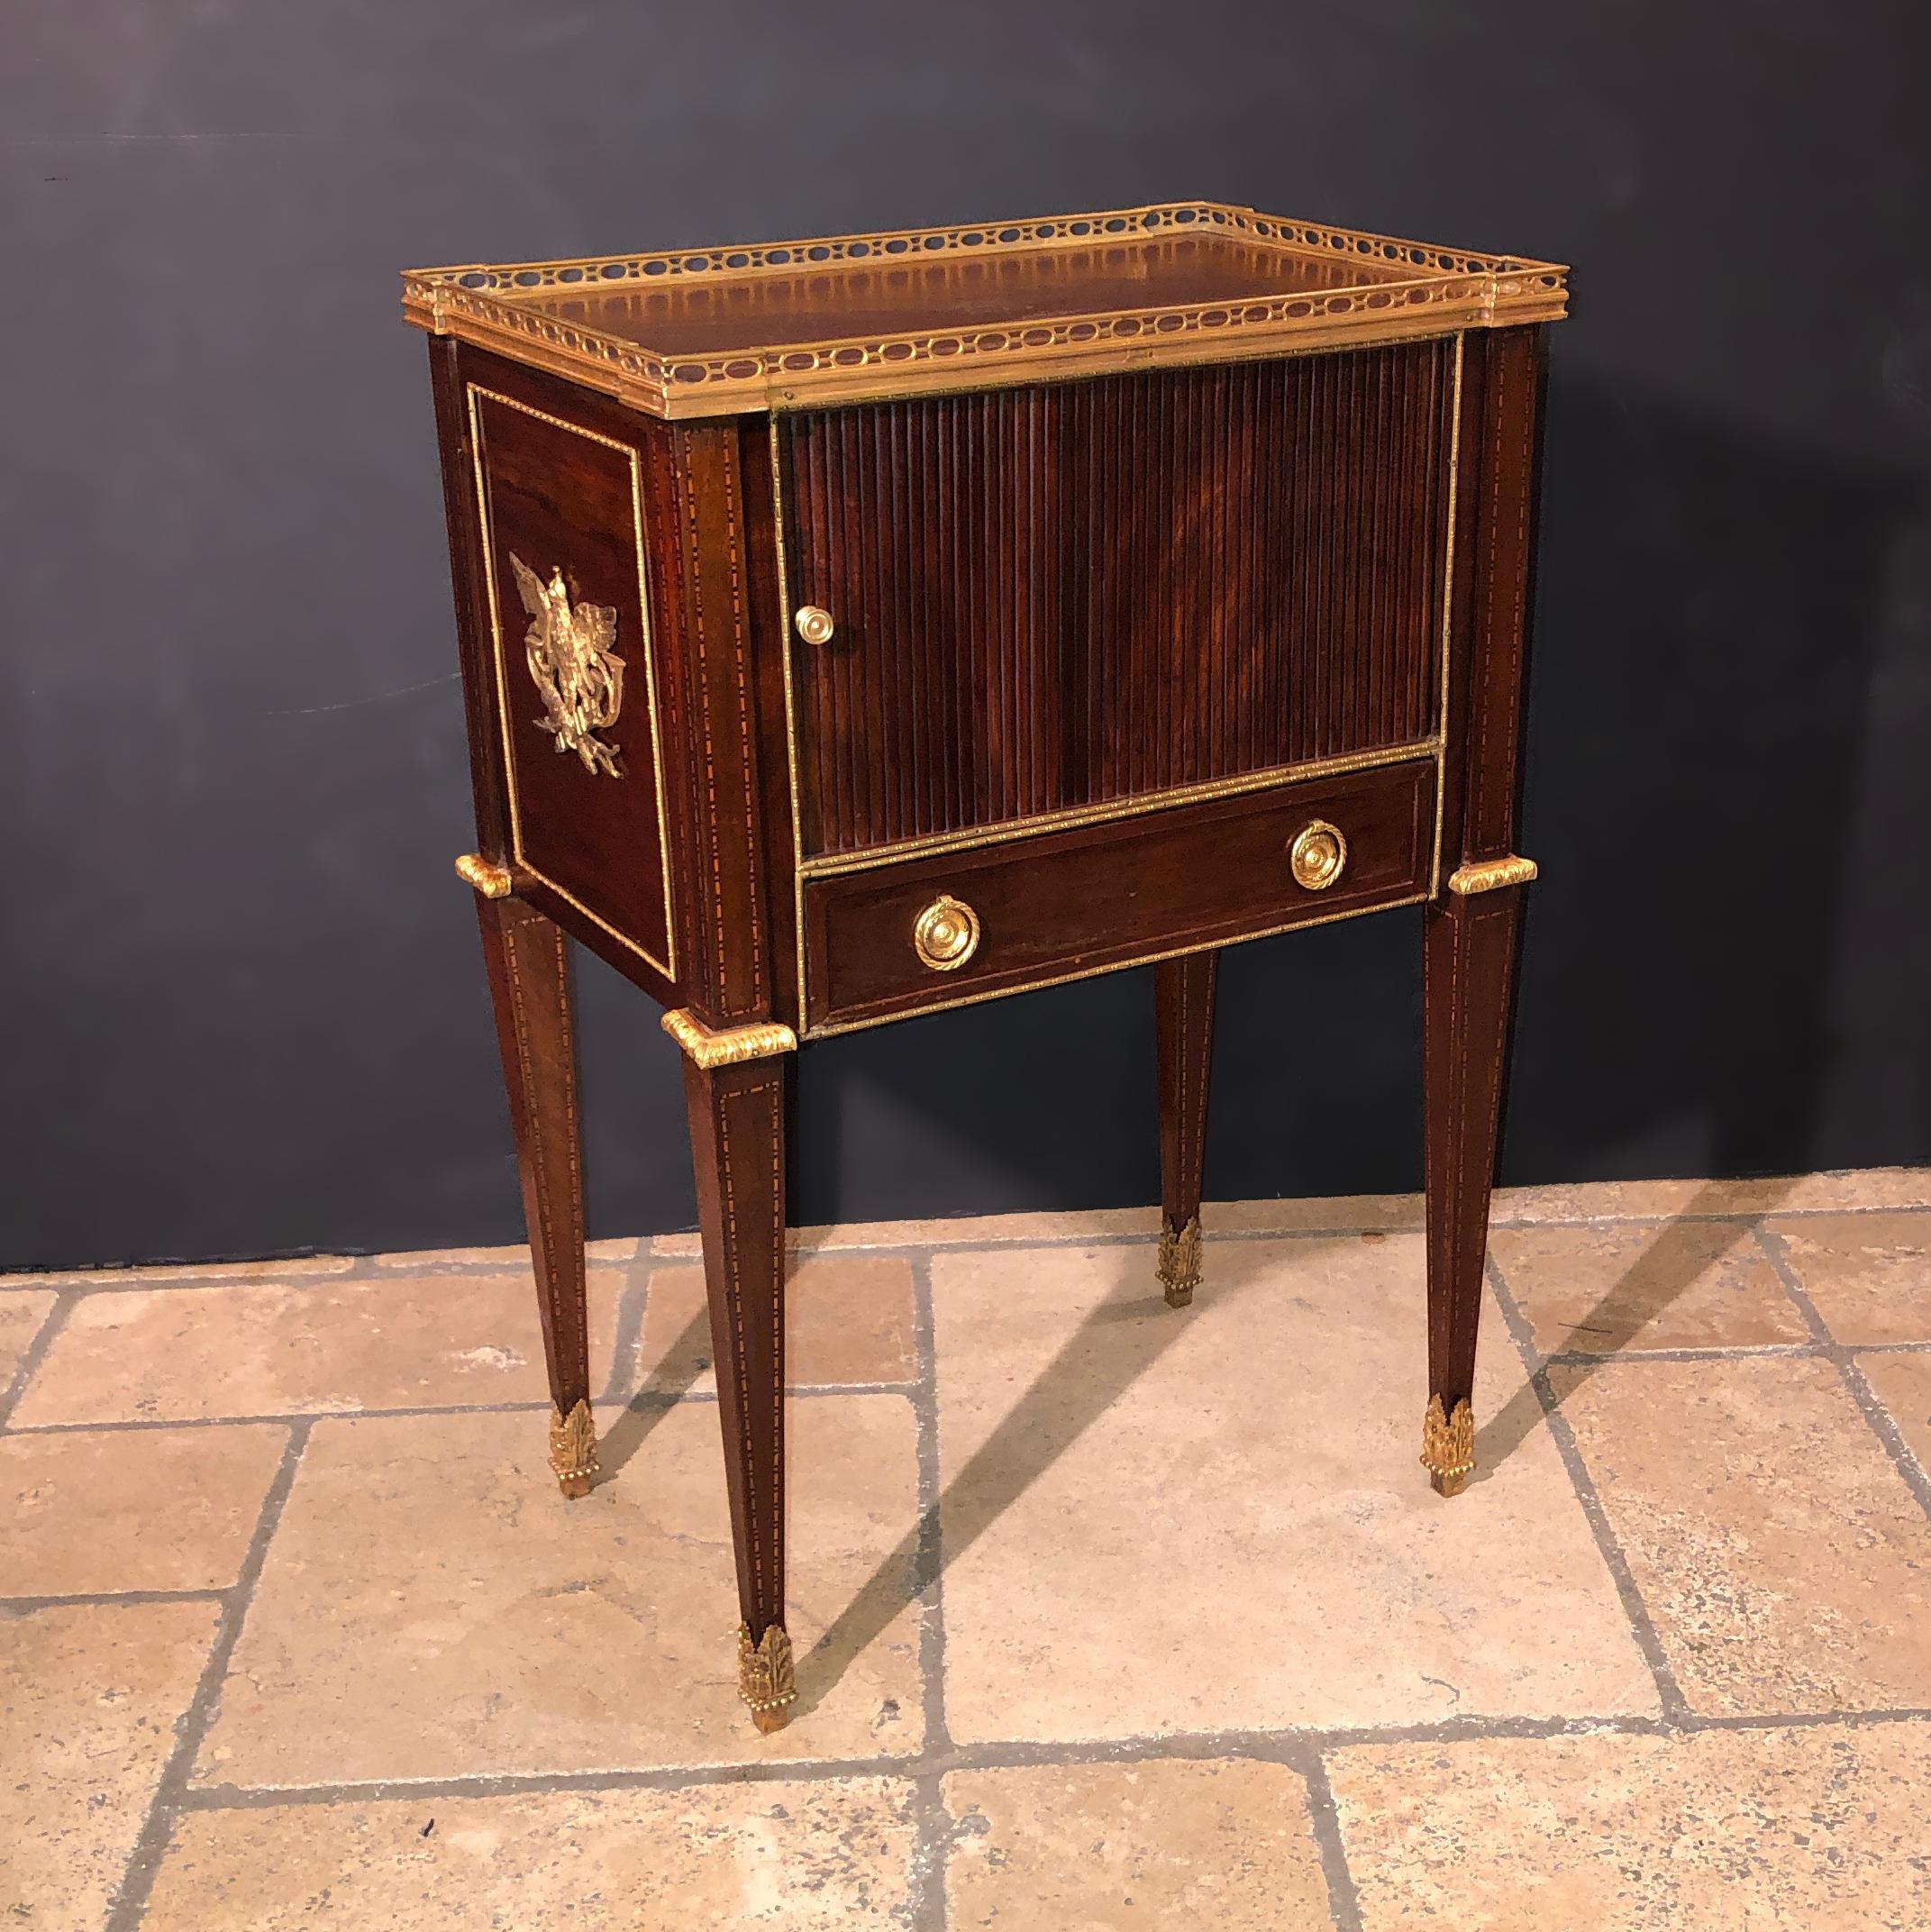 A fine Russian neoclassic mahogany end table with a tooled leather top, pierced bronze gallery, brass trim, tambour door with a single drawer and raised on tapered legs.